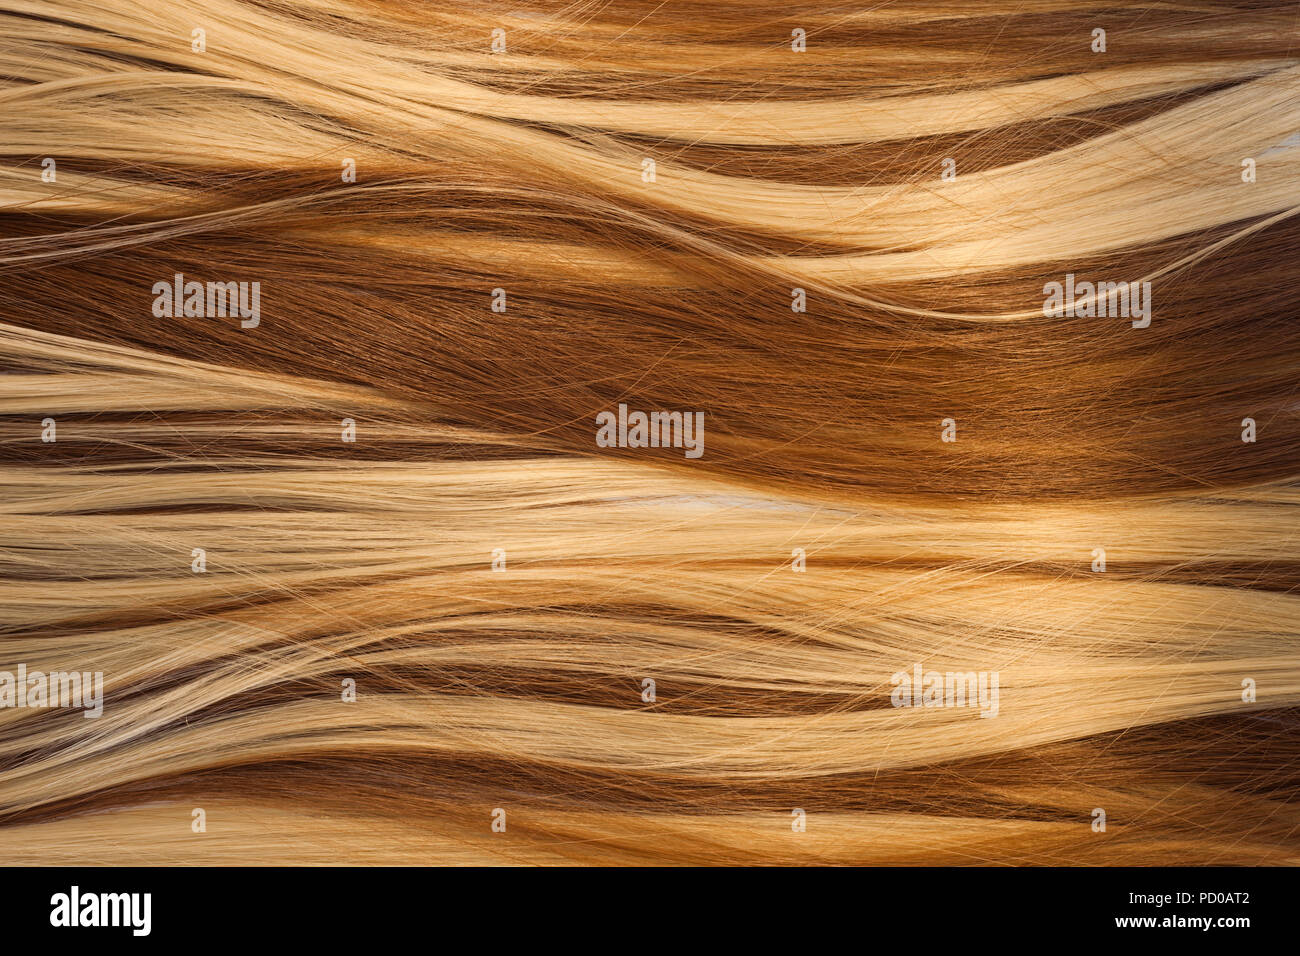 blond and brown hair texture Stock Photo